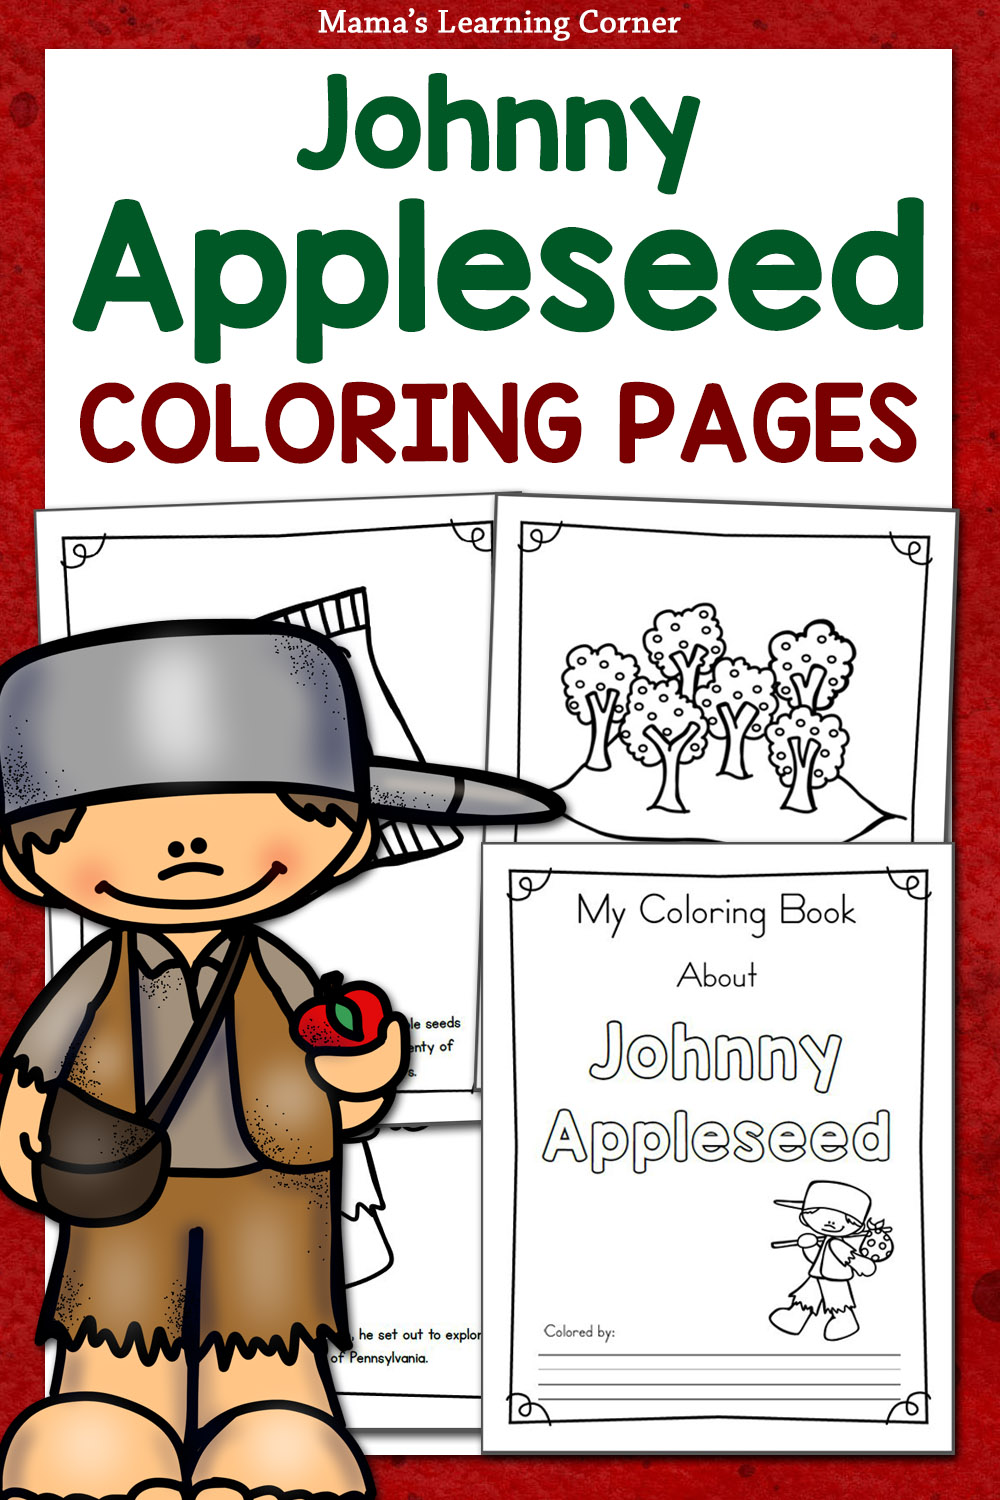 johnny-appleseed-coloring-pages-mamas-learning-corner